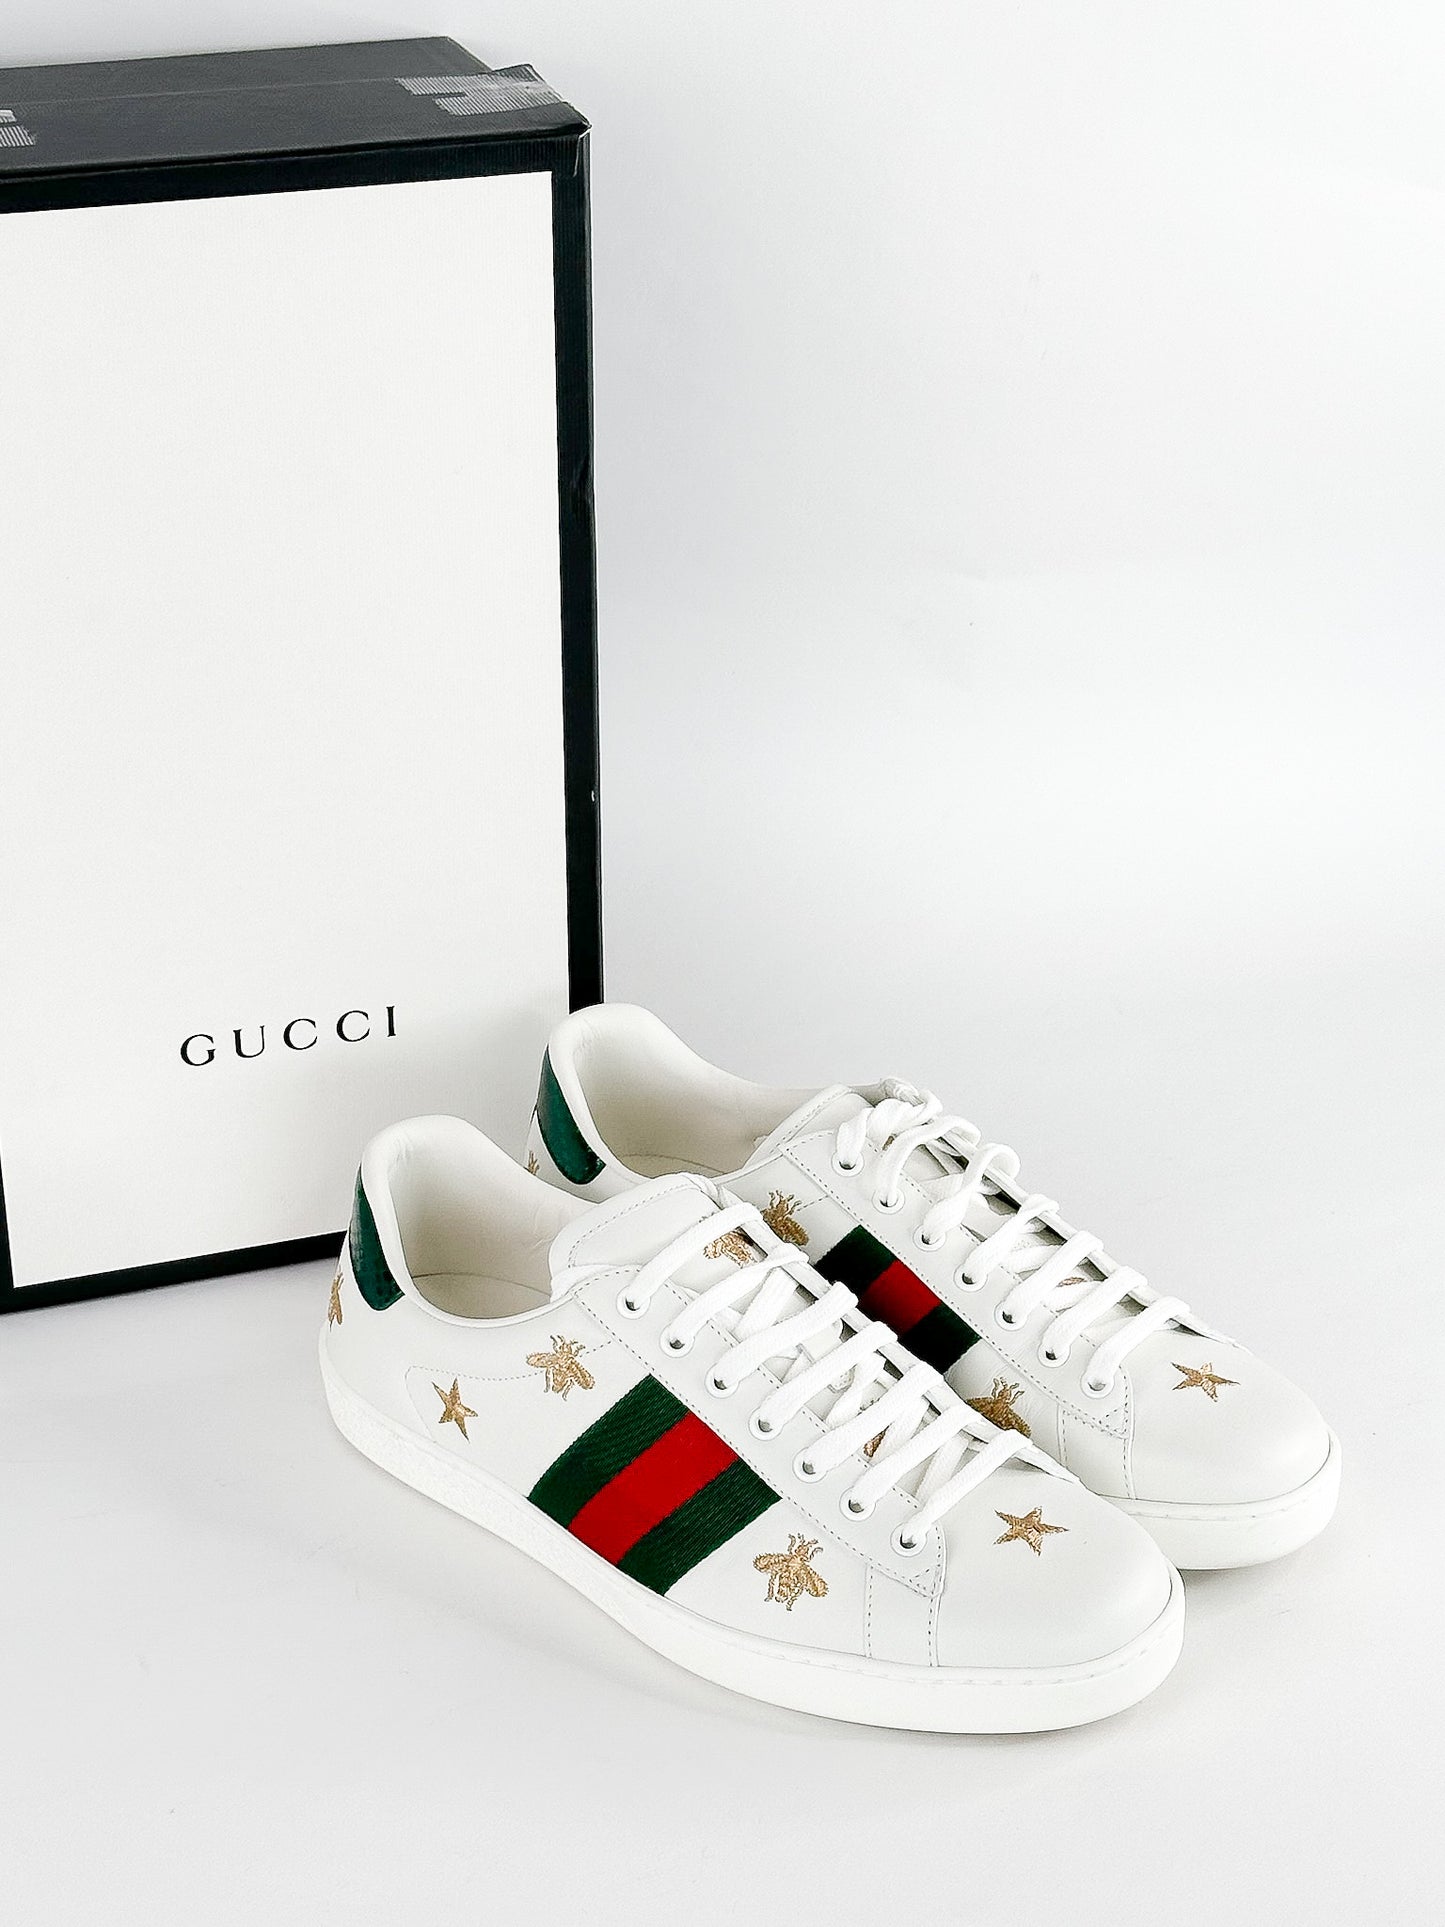 Gucci White Bee & Star New Ace Sneakers
Size Mens 8.5 / Womens 10.5-11